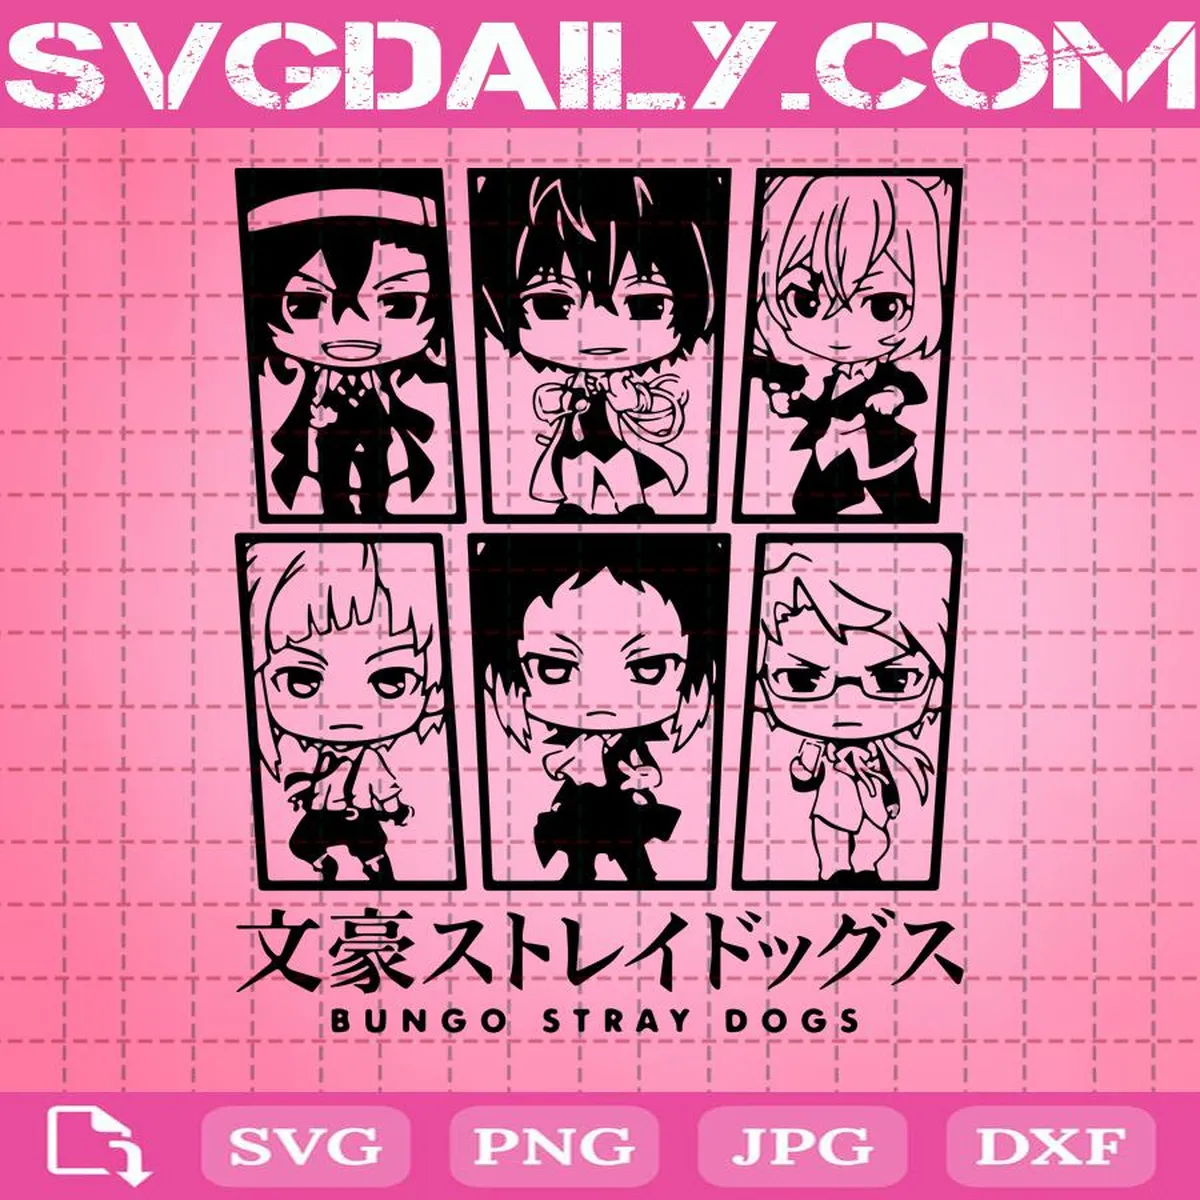 Bungo Stray Dogs Svg, Anime Svg, Love Anime Svg, Anime Manga Svg, Manga Svg, Cartoon Svg, Svg Png Dxf Eps AI Instant Download